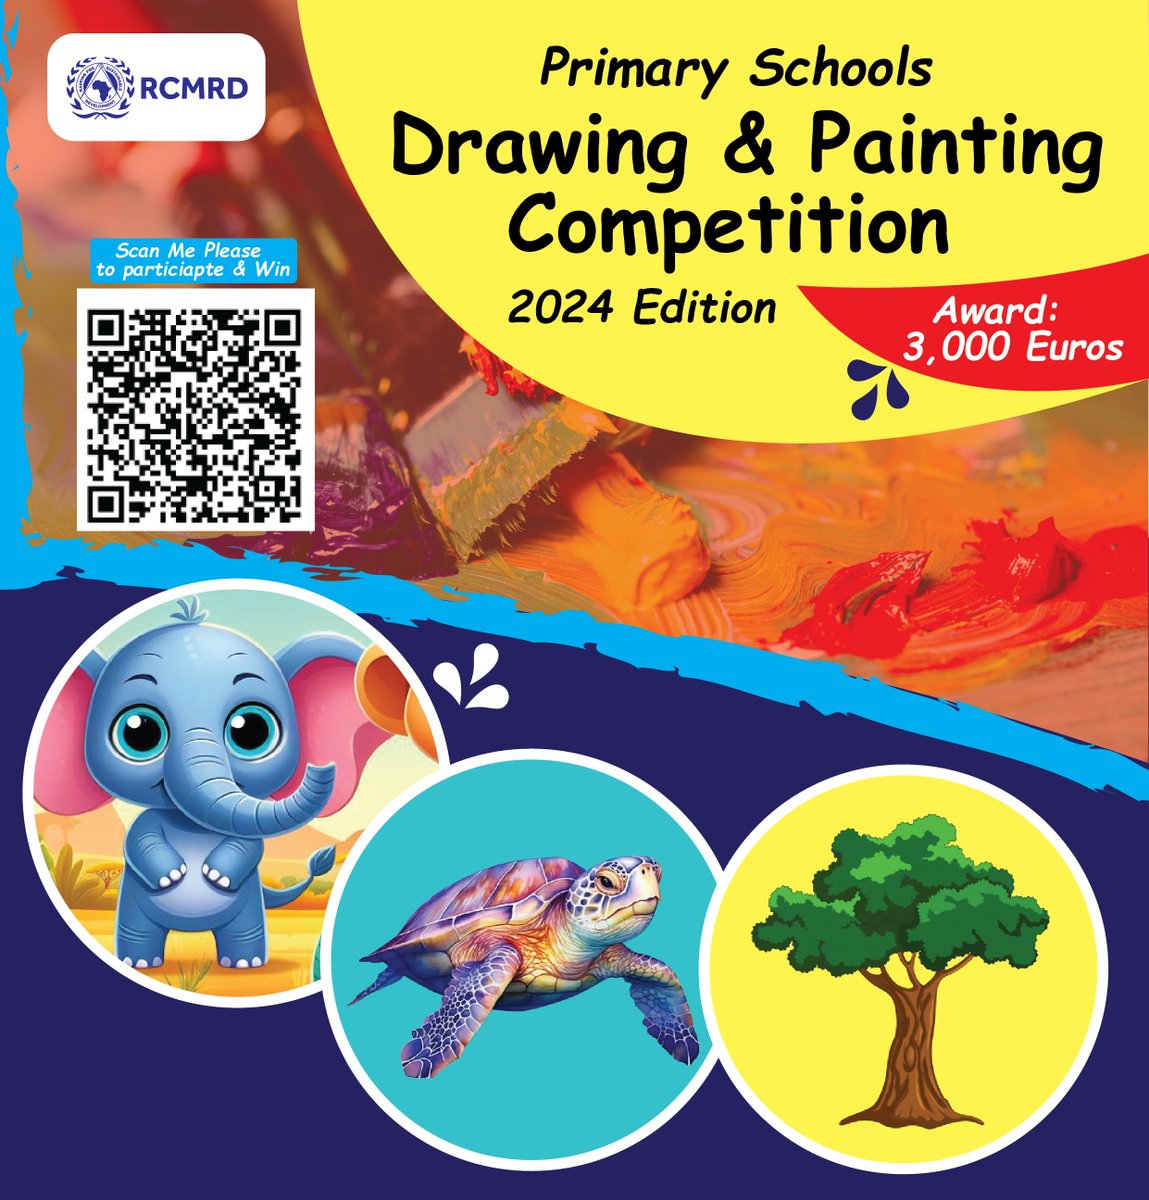 🎨Dear friends, have you made your submission for the 2024 edition of the RCMRD Drawing, Painting and Map Competition? We have three categories: primary schools, secondary schools, and professional. 16,000 euros are to be won. Submit today! ➡️rcmrd.africageoportal.com/pages/rcmrd-ma…